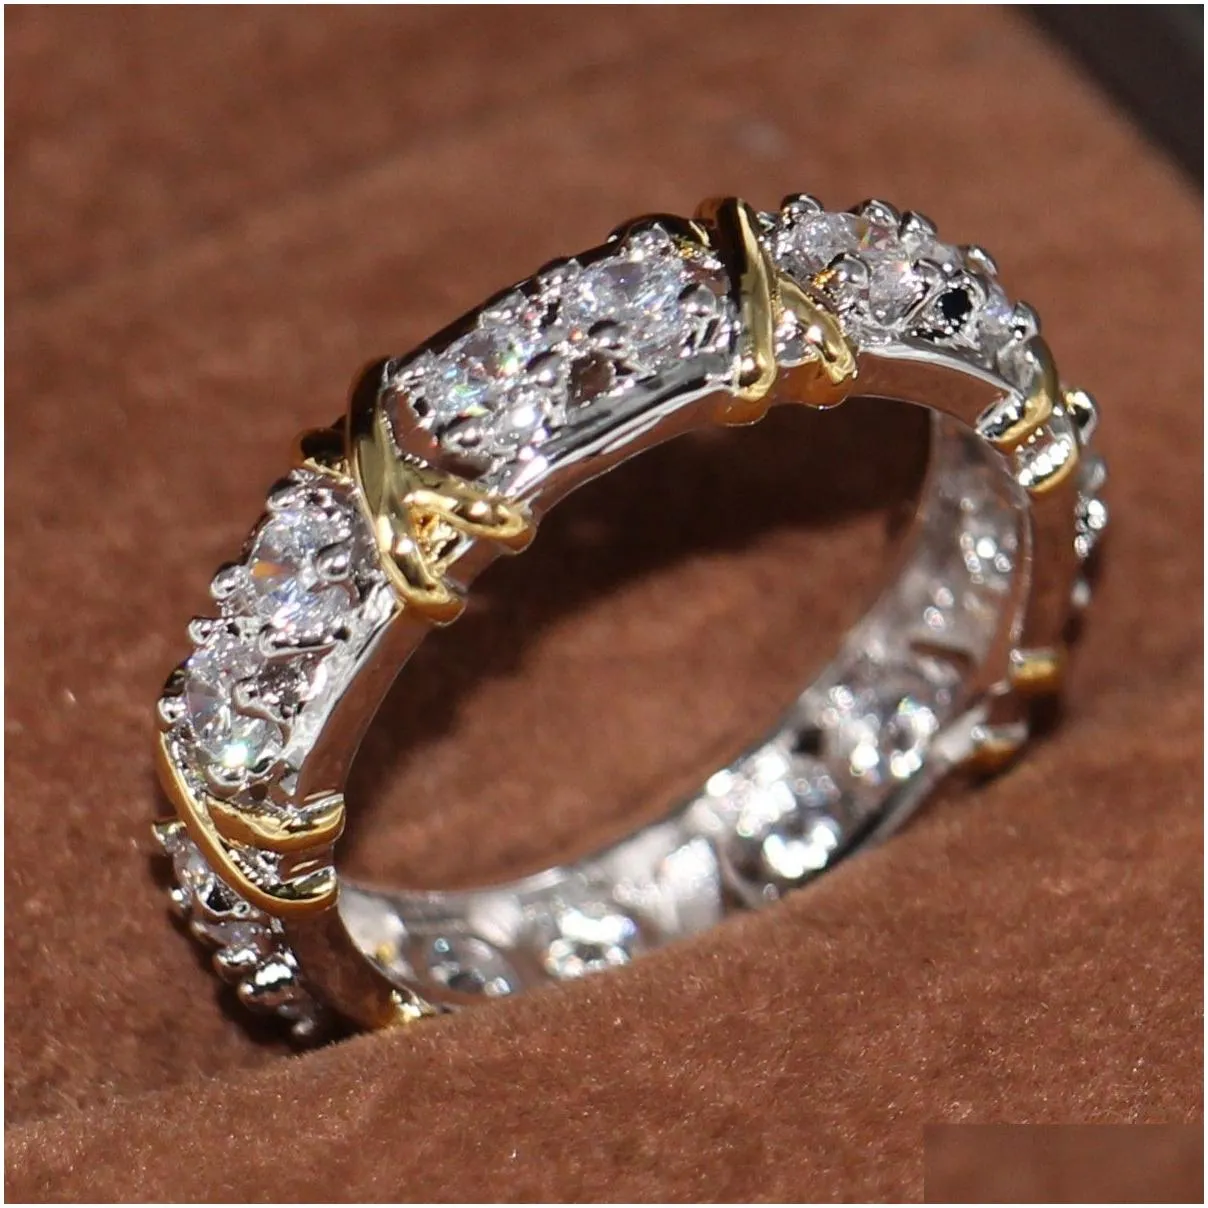 Wedding Rings Wholesale Professional Eternity Diamonique Cz Simated Diamond 10Kt White Yellow Gold Filled Wedding Band Cross Ring Size Dh632